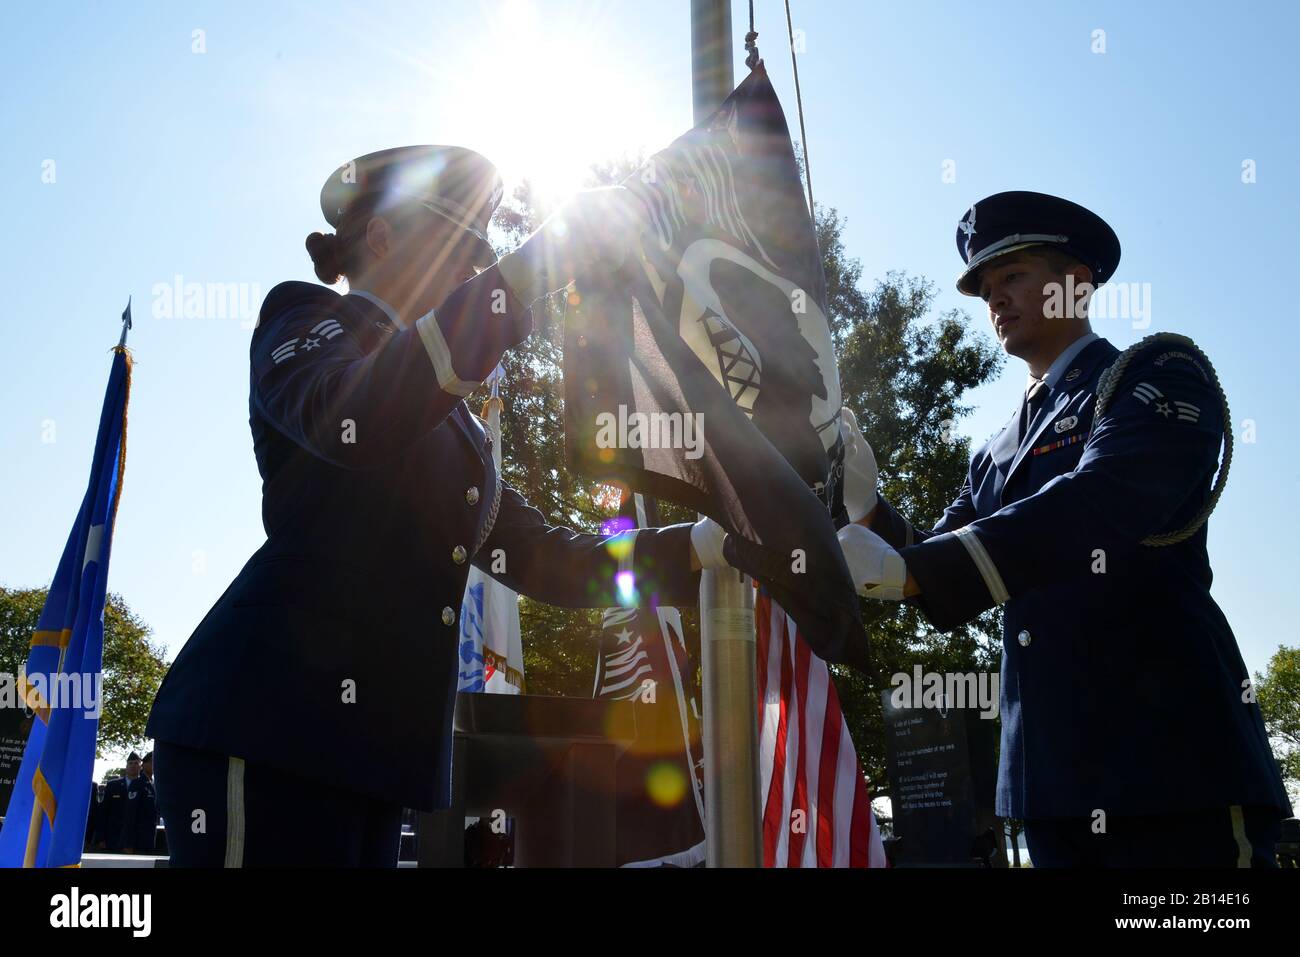 U.S. Airmen assigned to the Langley Air Force Base Honor Guard raise the POW/MIA flag during the POW/MIA Remembrance Day ceremony at Joint Base Langley-Eustis, Va., Sept. 15, 2017. A moment of silence was taken as the community honored and remembered those still missing in action and prisoners of war. (U.S. Air Force photo by Airman 1st Class Alexandra Singer) Stock Photo